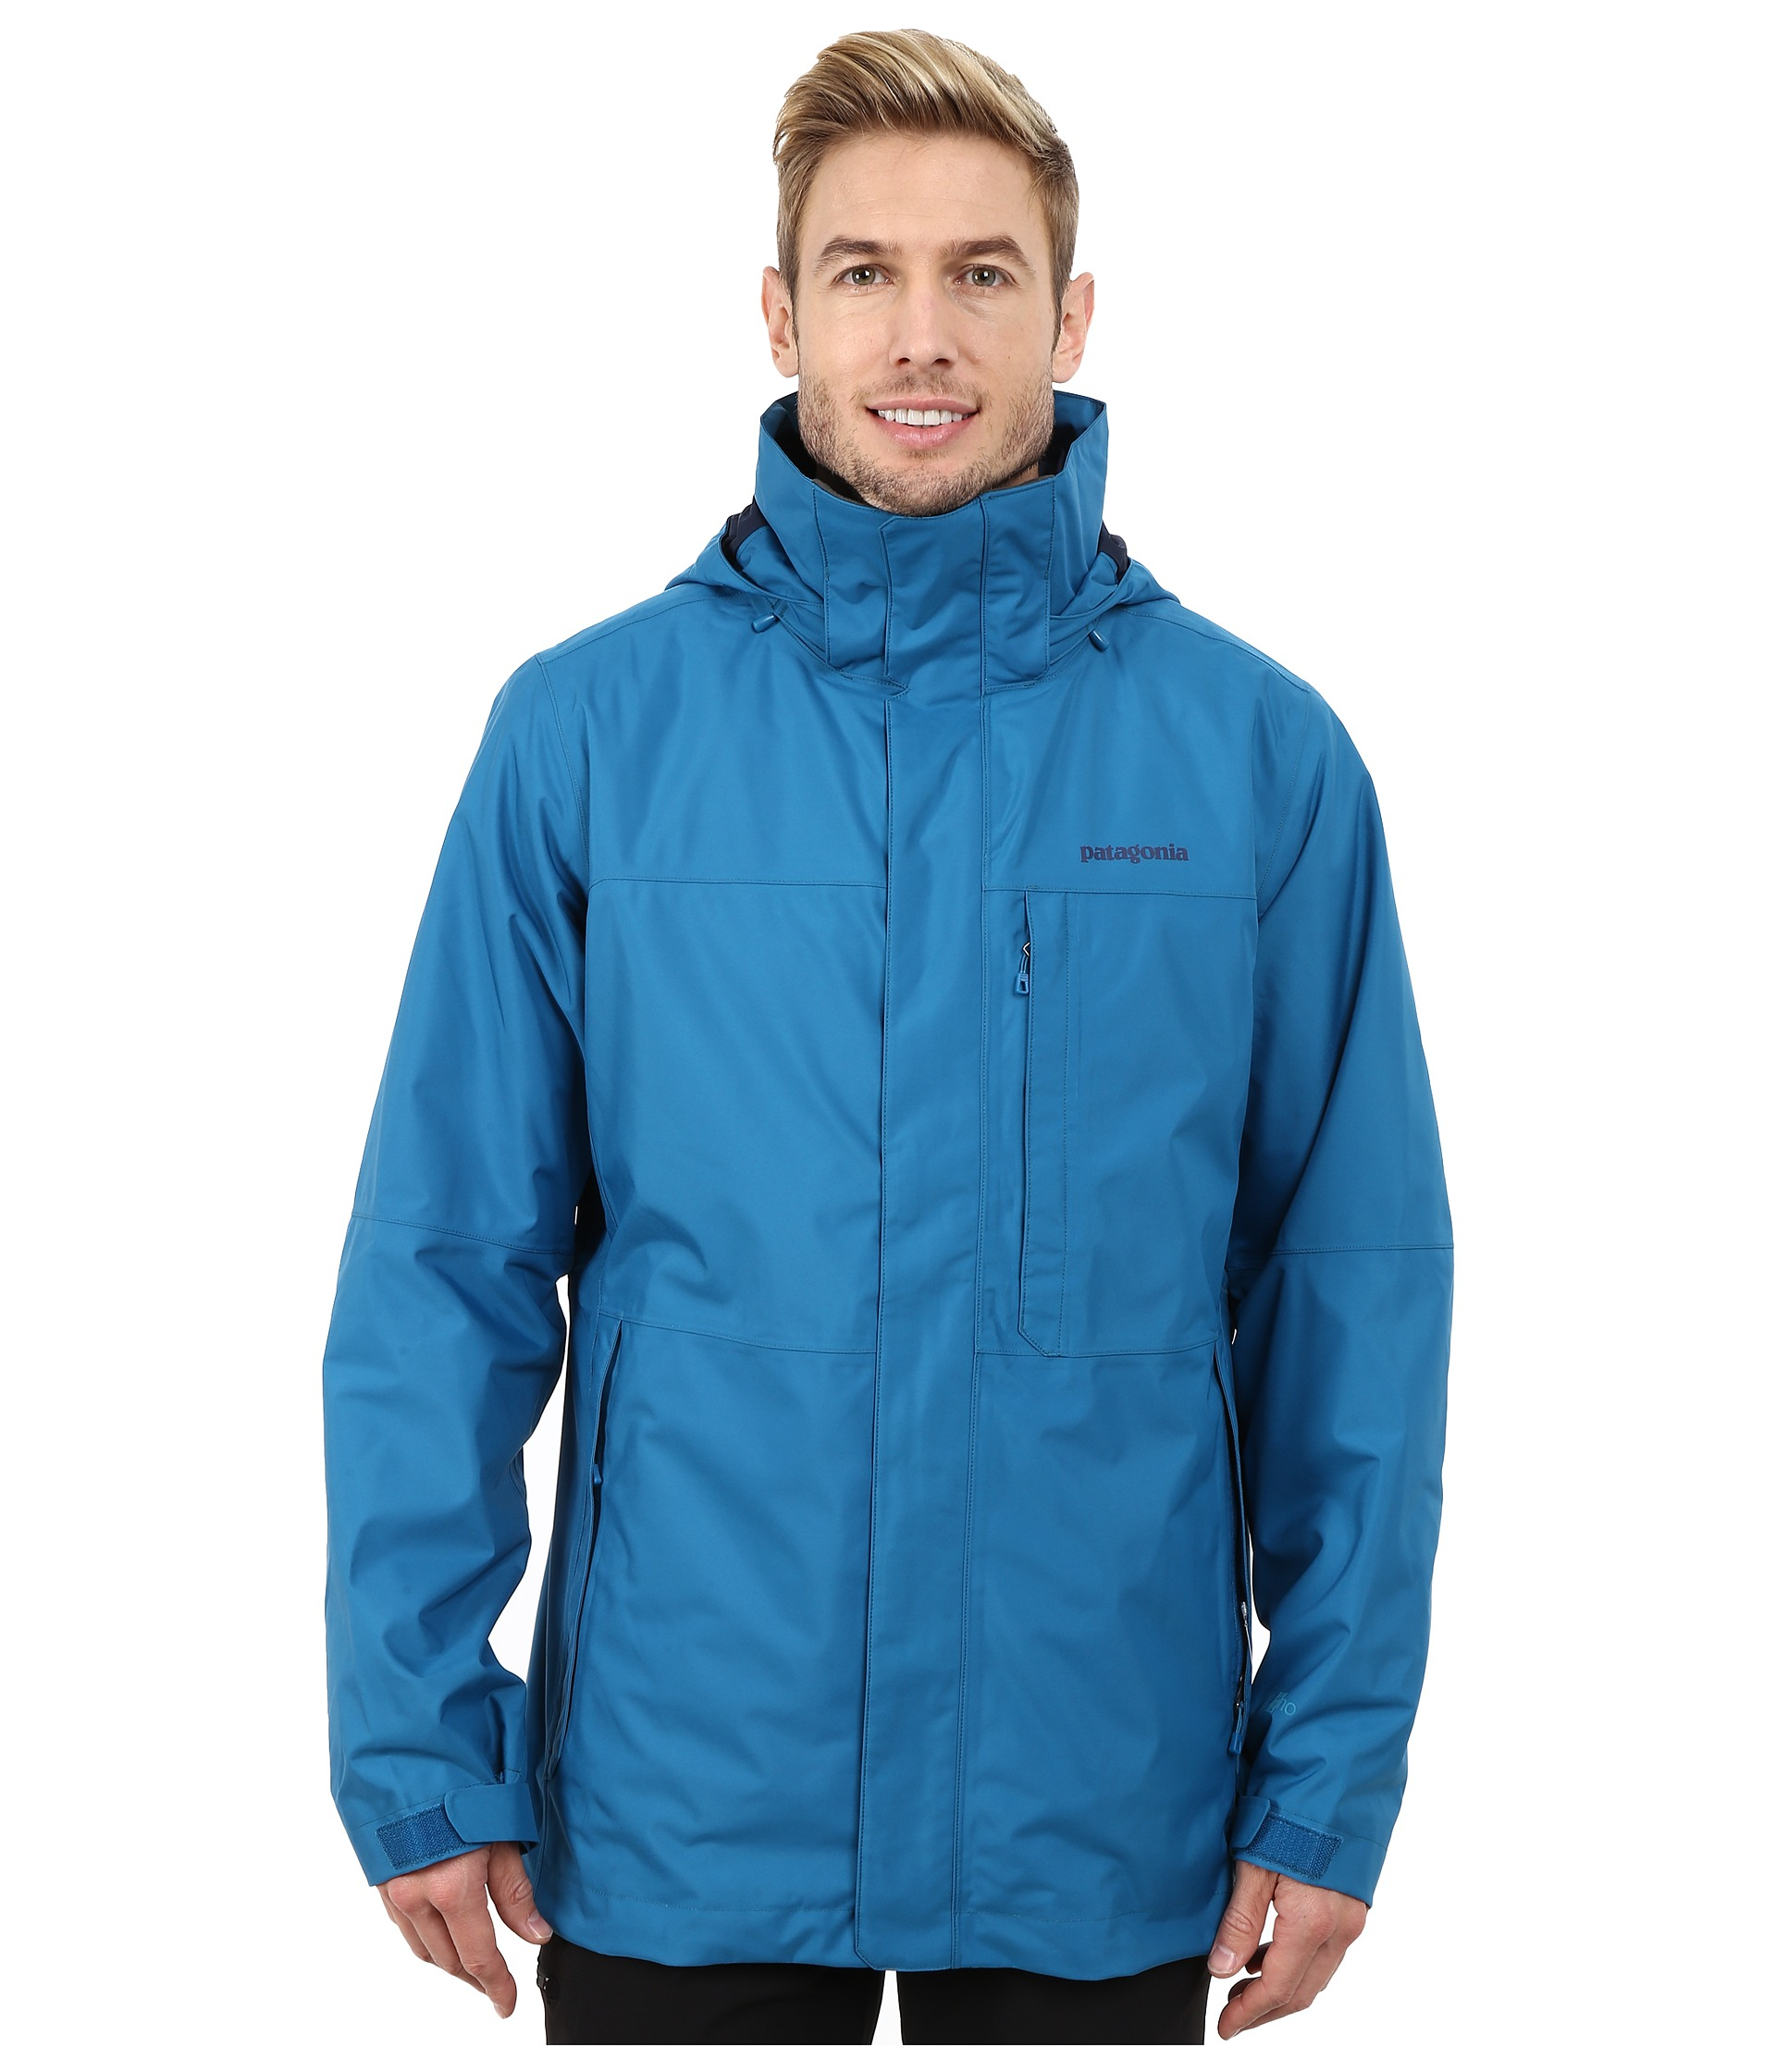 Patagonia Synthetic 3-in-1 Snowshot Jacket in Blue for Men - Lyst